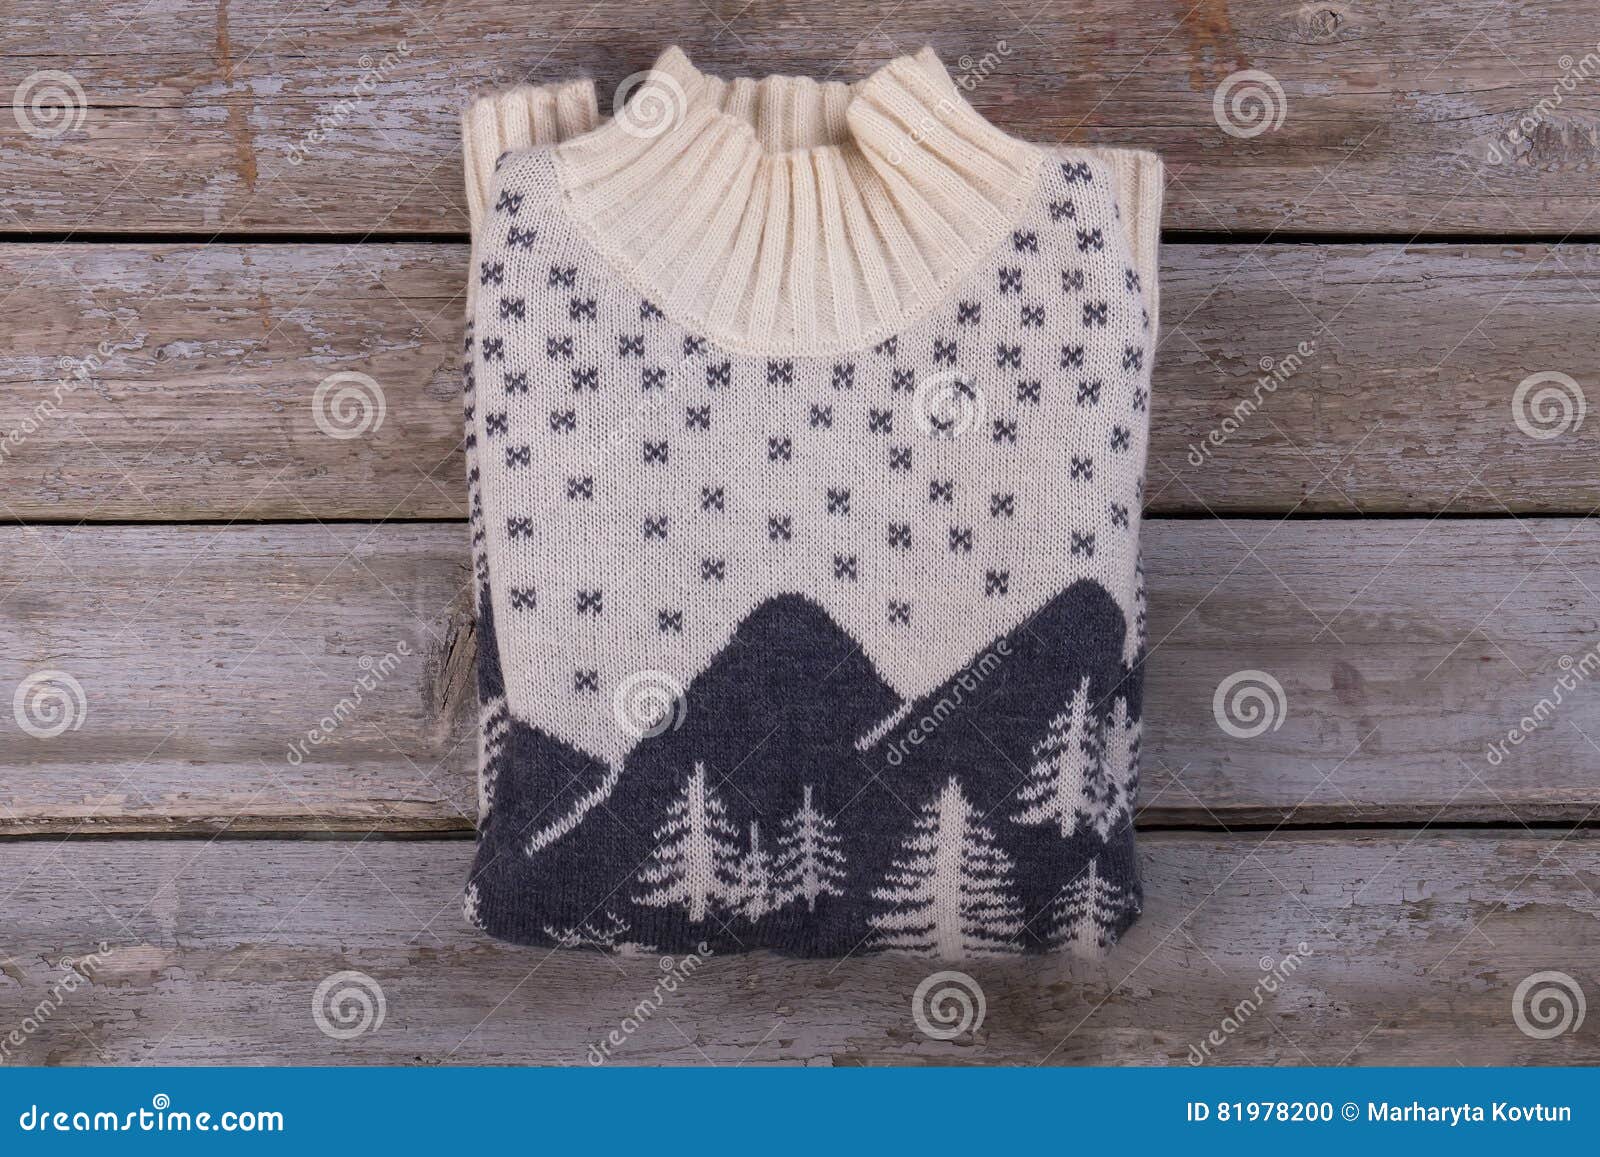 Woolen Warm Sweater with Winter Pattern. Stock Photo - Image of ...